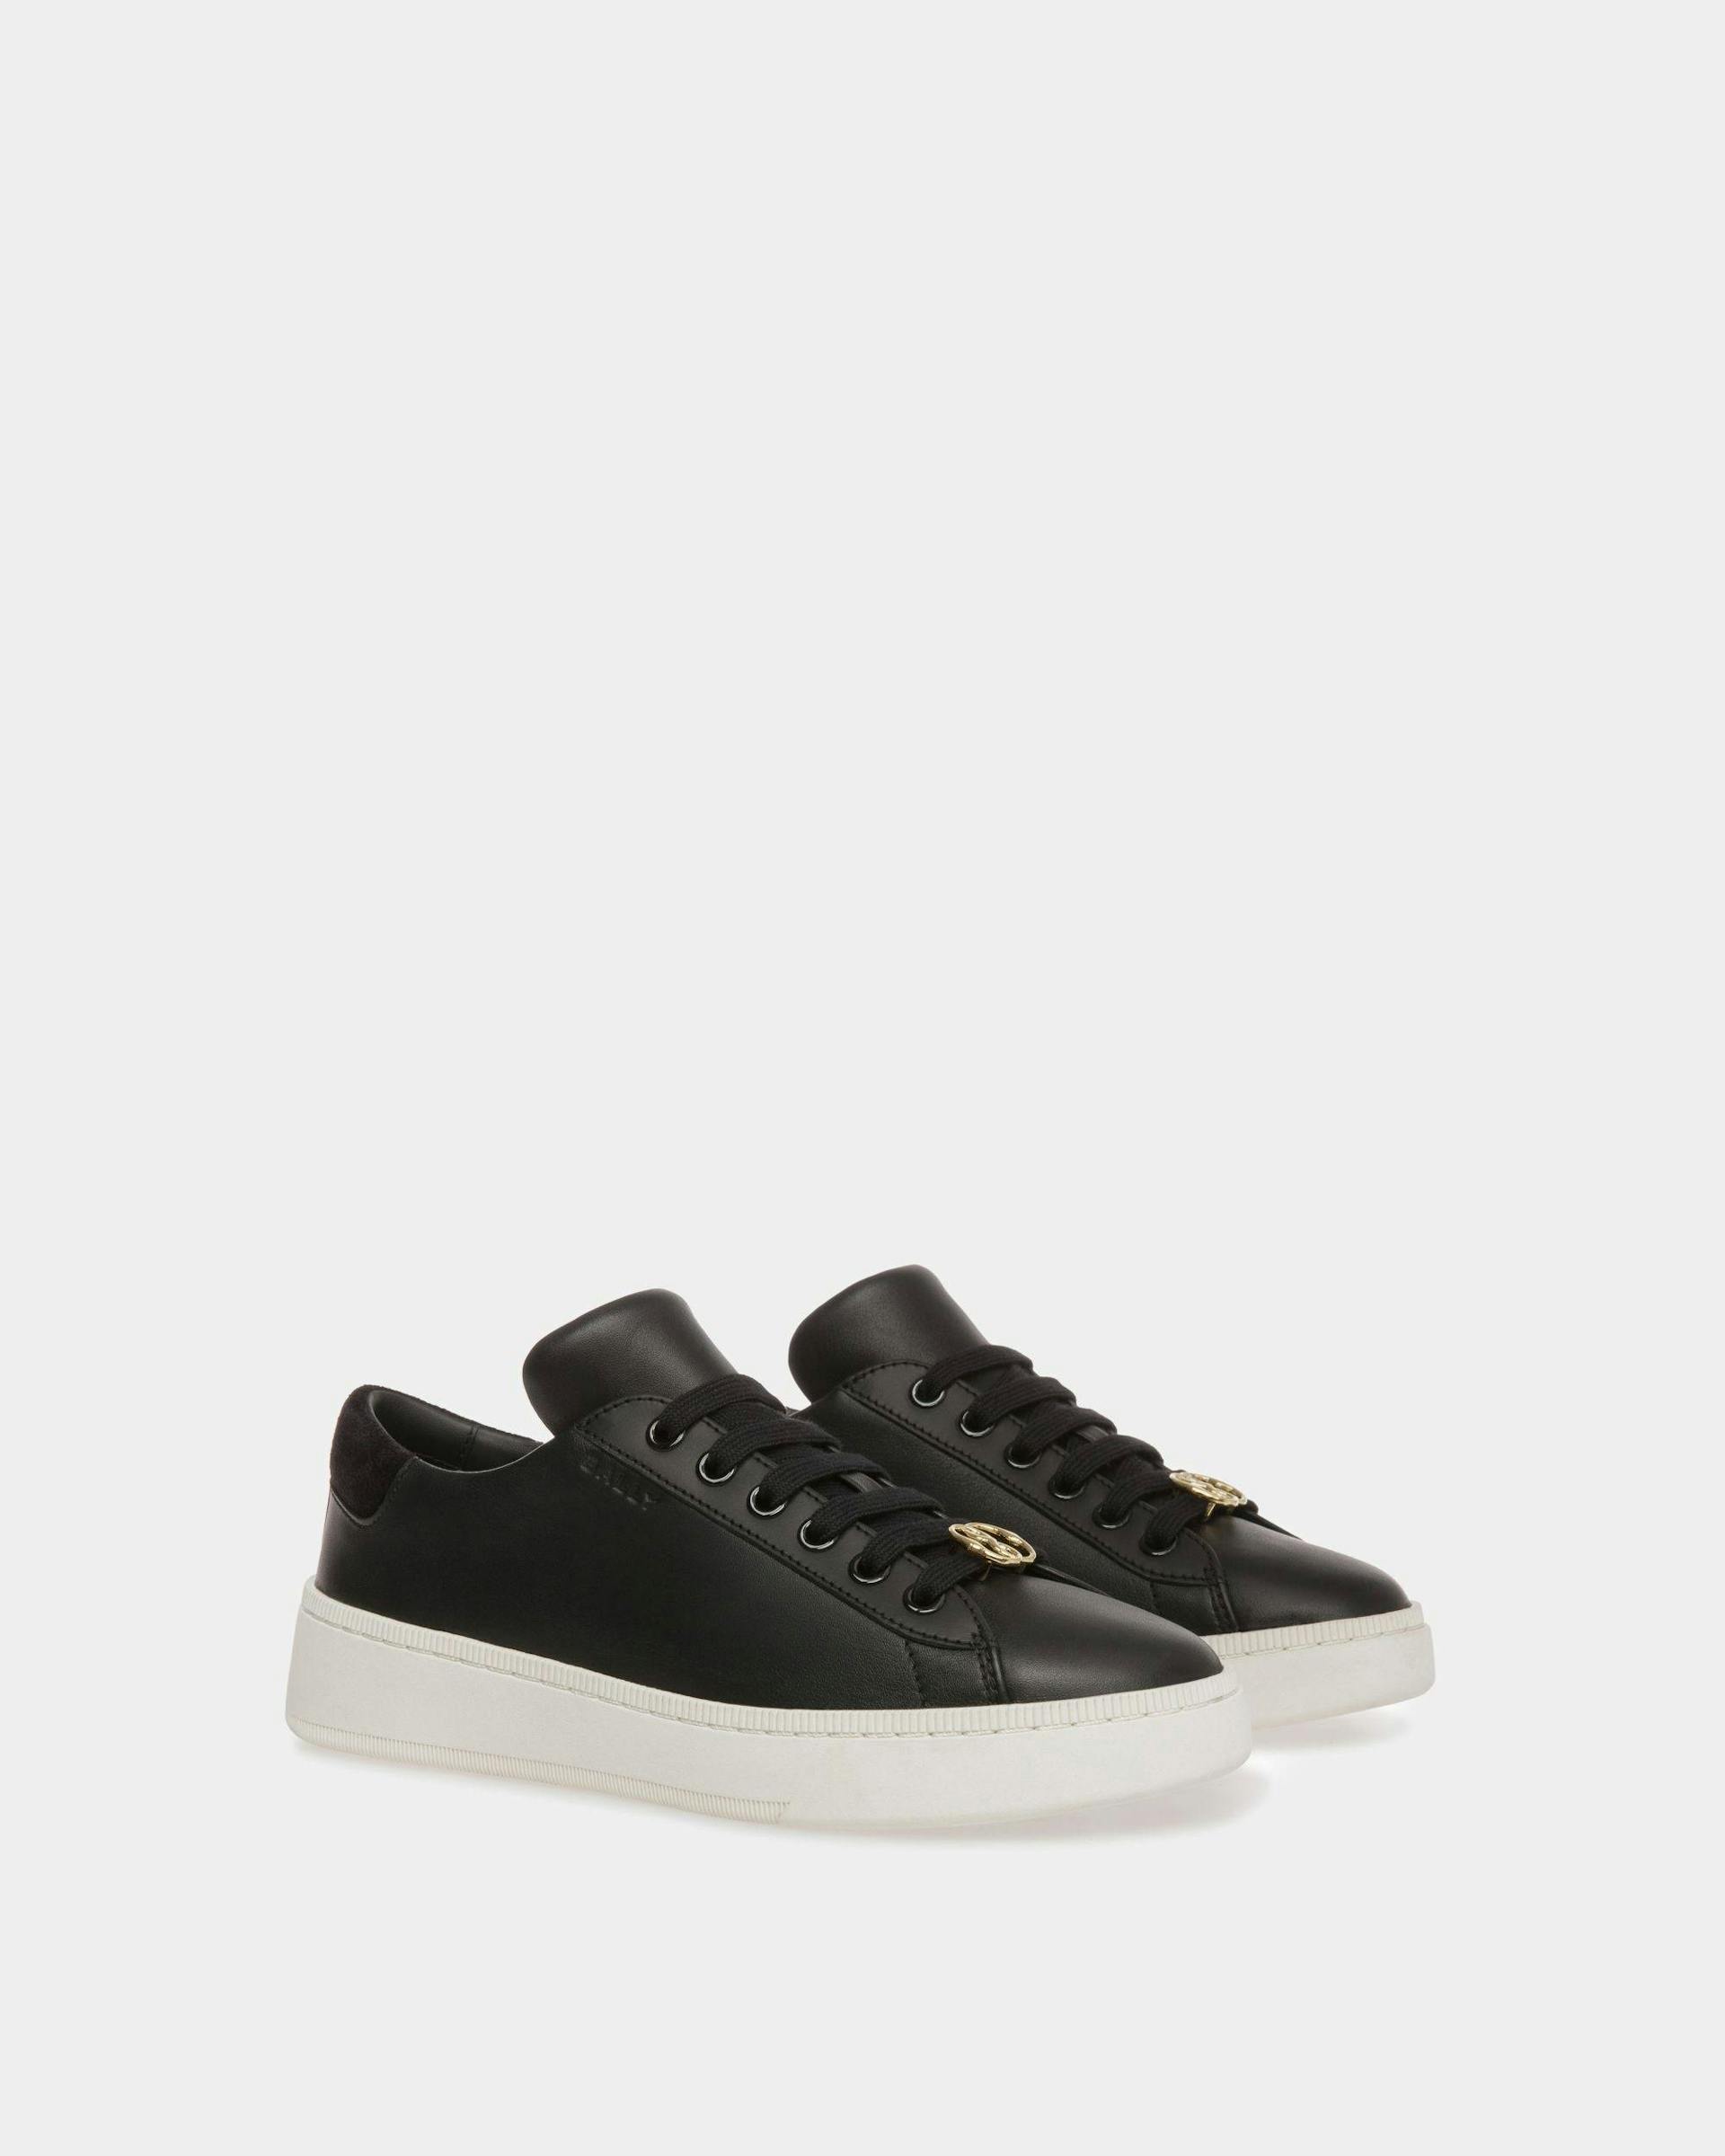 Women's Raise Sneakers In Black And White Leather | Bally | Still Life 3/4 Front